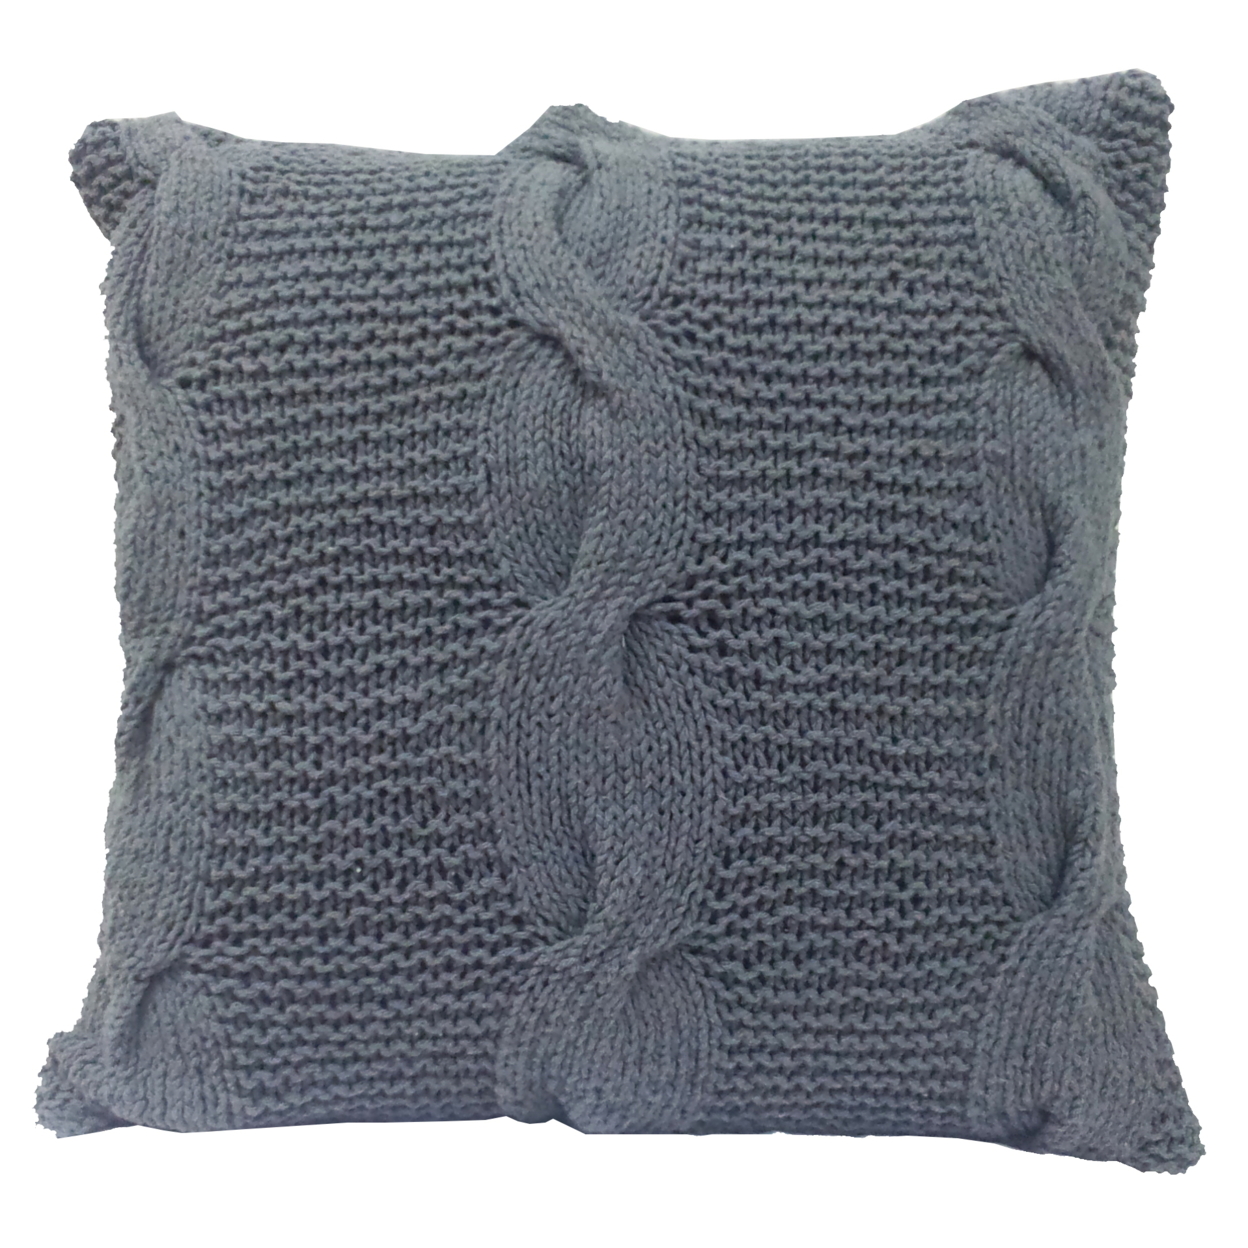 18 X 18 Inch Cable Knit Hand Woven Cotton Pillow, Gray